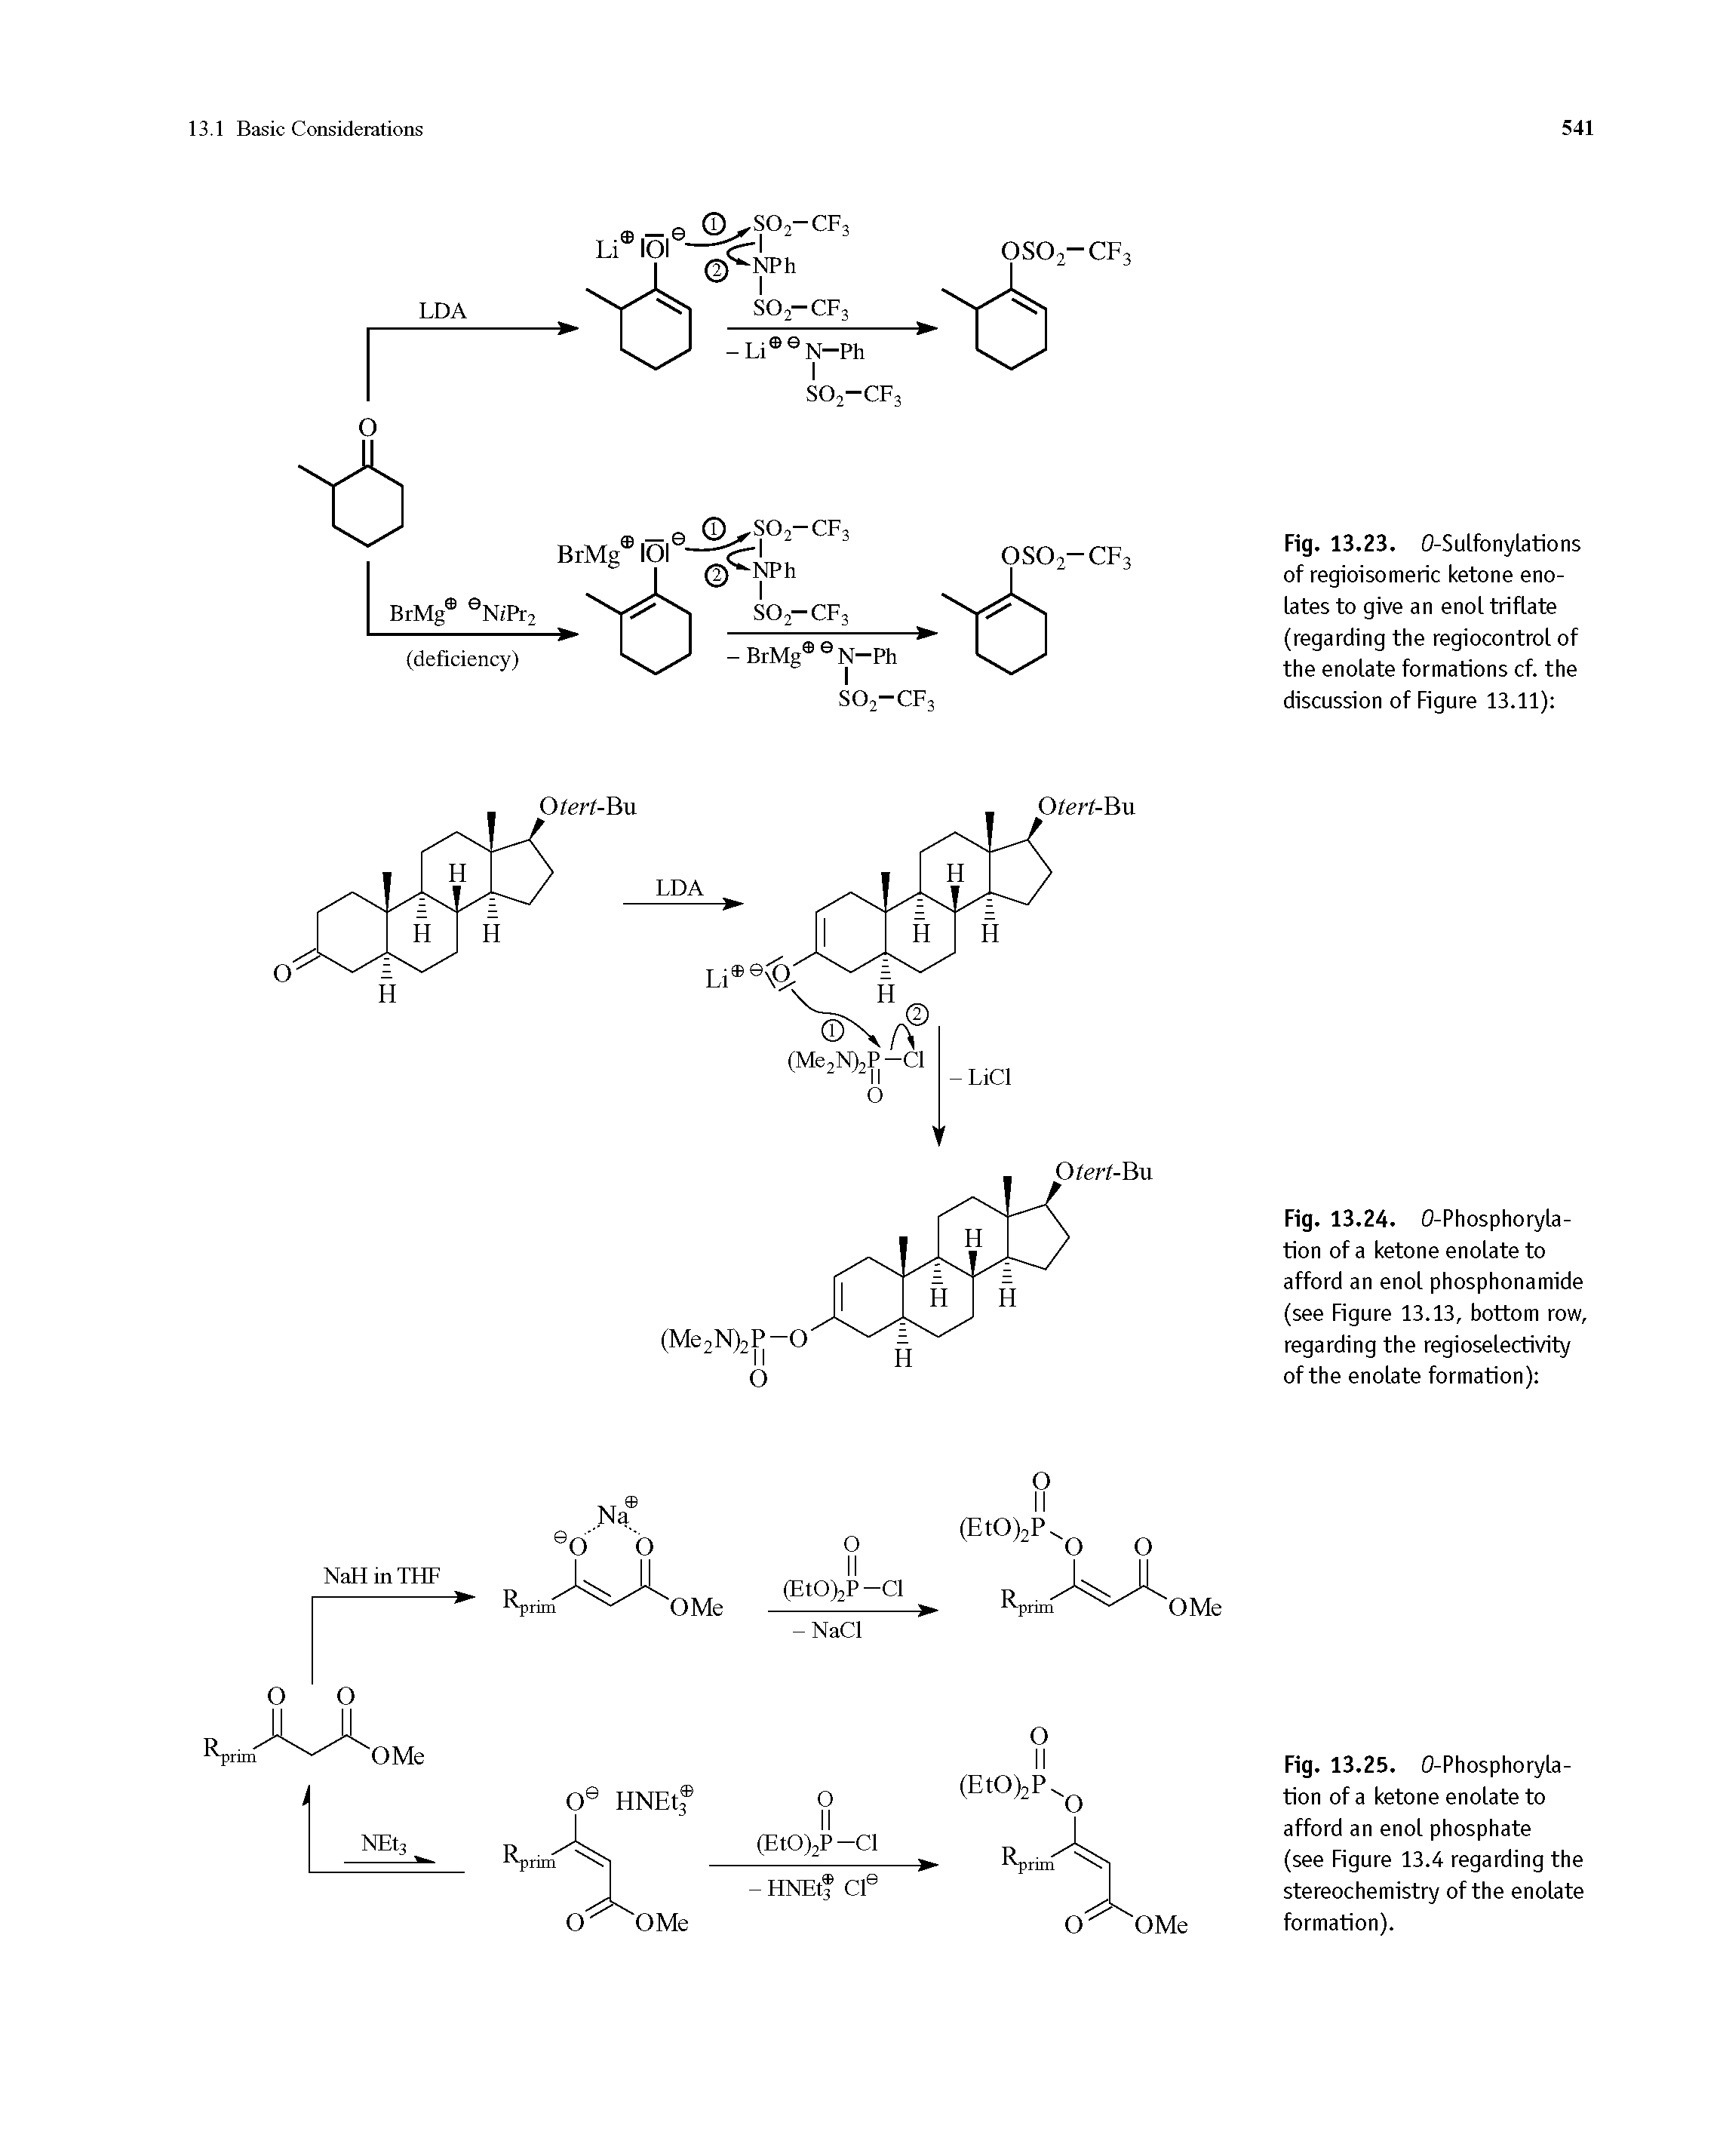 Fig. 13.25. O-Phosphoryla-tion of a ketone enolate to afford an enol phosphate (see Figure 13.4 regarding the stereochemistry of the enolate formation).